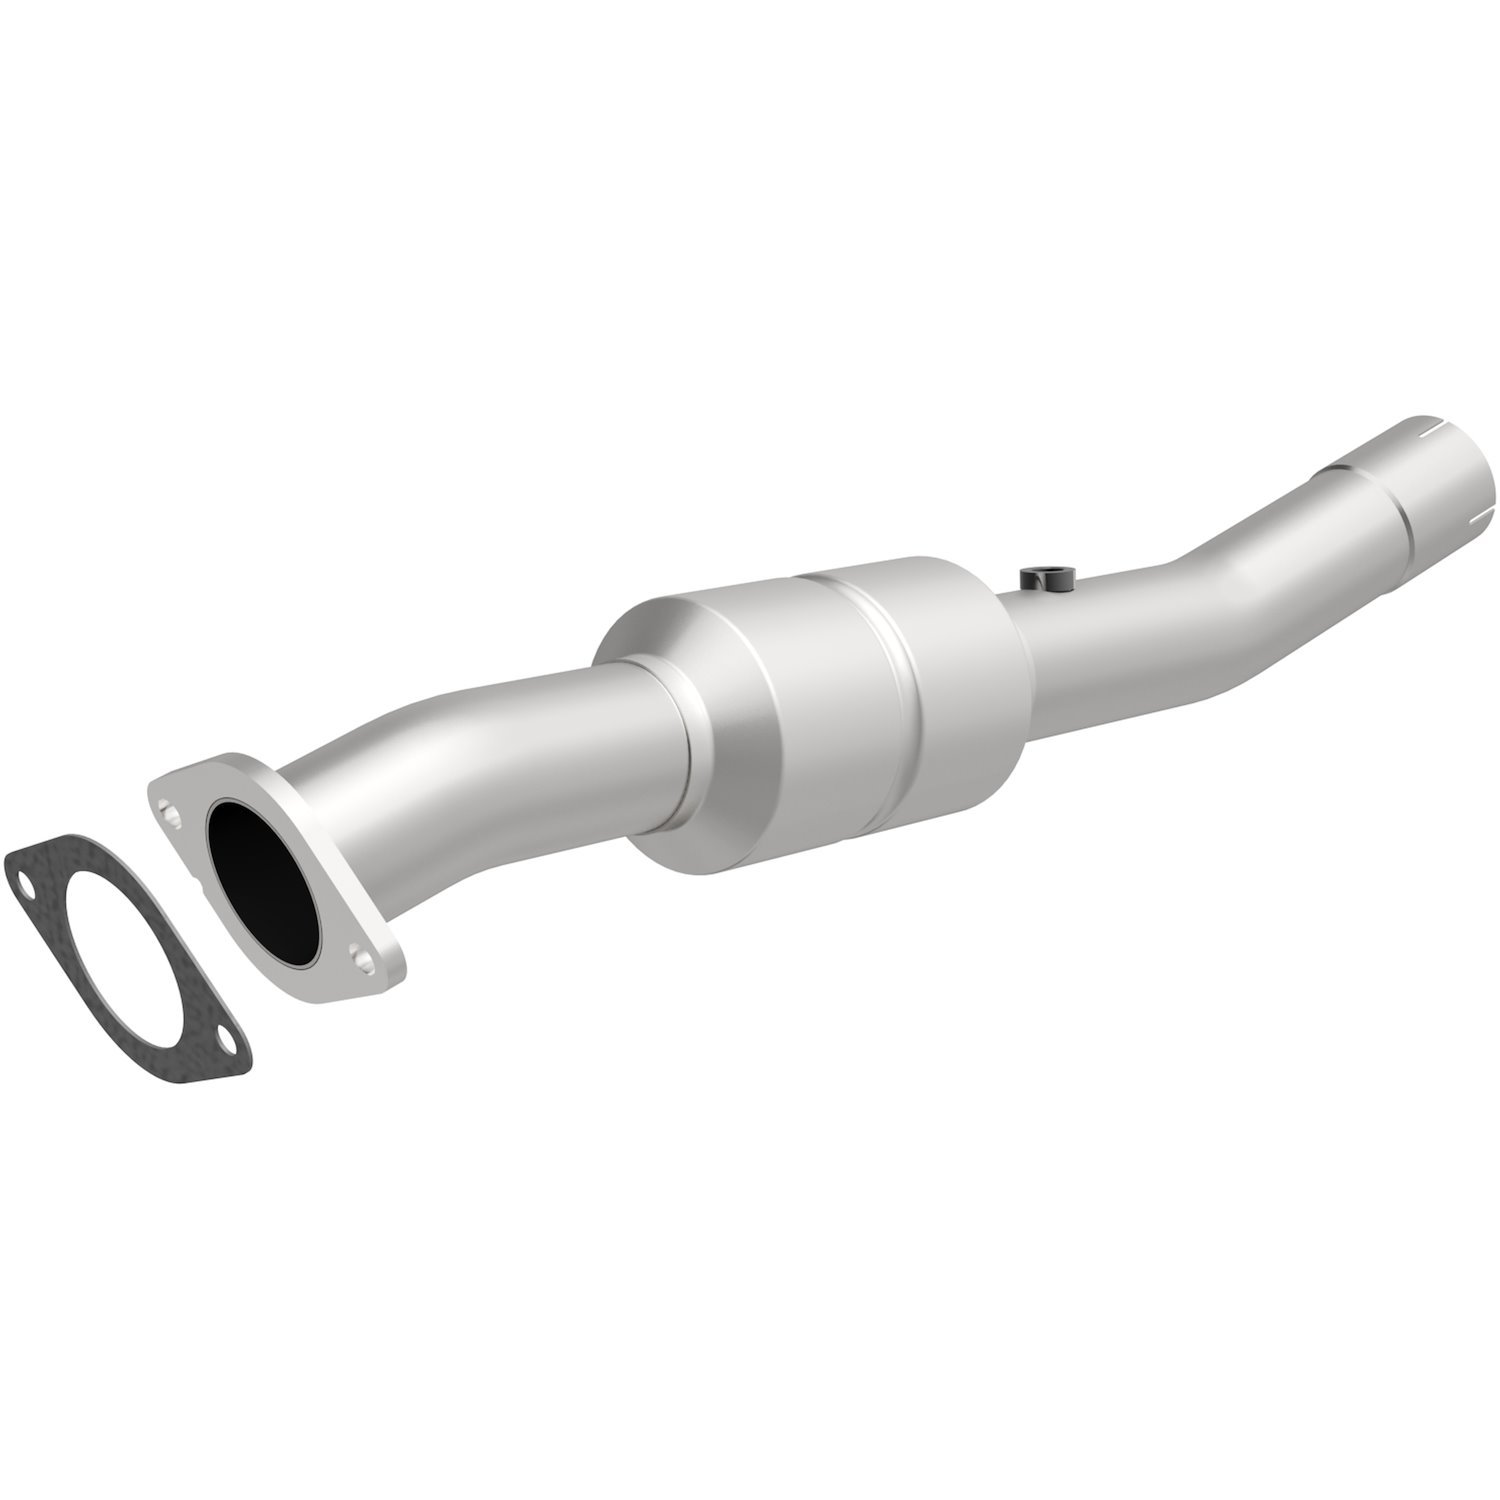 Direct-Fit Catalytic Converter 2003-2007 Chevy/GMC Truck 1500 6.0L